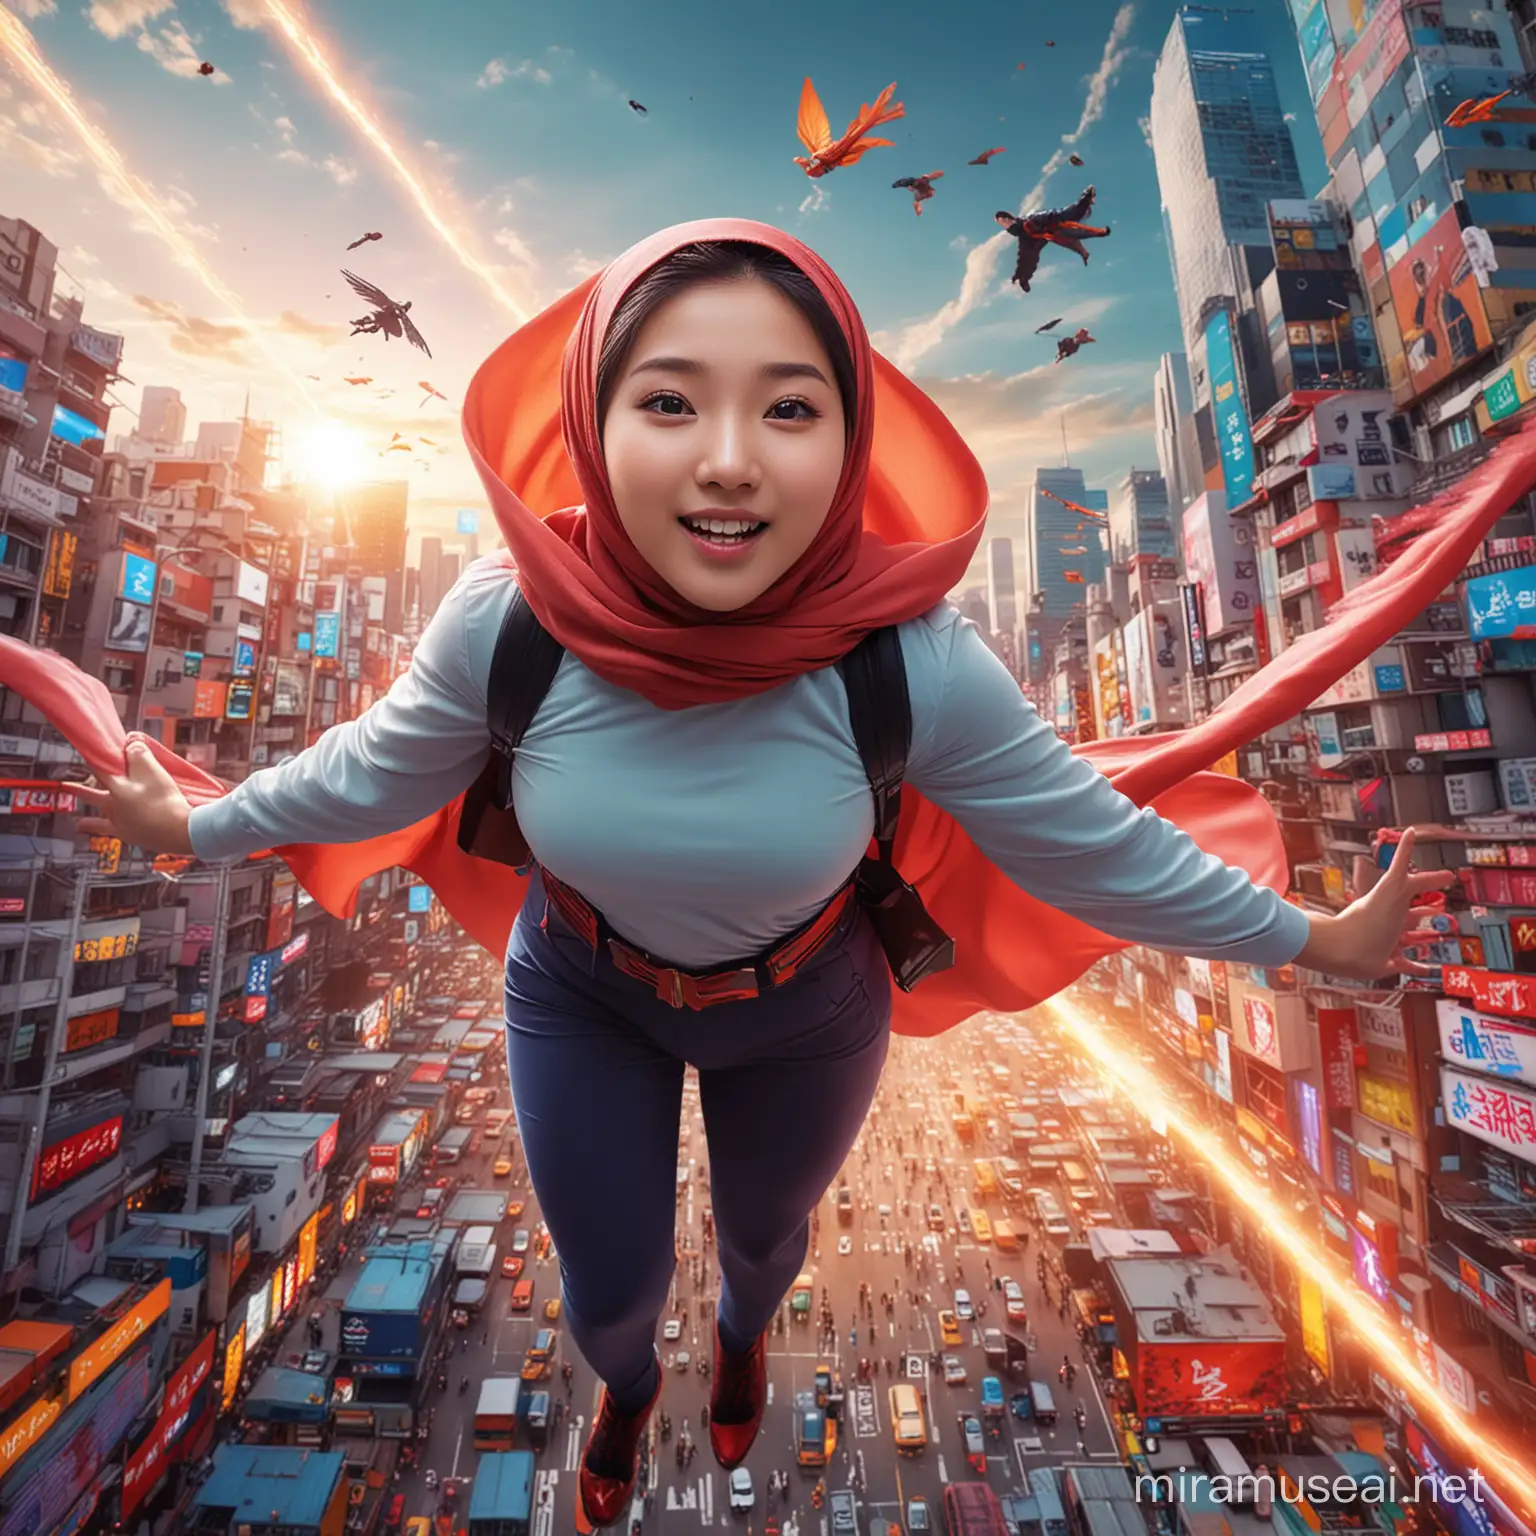 a girl japanese young 17 year old,beautifull baby face, white skin and glow, Create a dynamic and action-packed photomanipulation reminiscent of Marvel superhero movies. Feature the japanese girl in hijab showcasing her unique superpowers in a cityscape, smile face very happy, fly in the sky, flaying sper girl, surrounded by vivid colors and high-energy effects